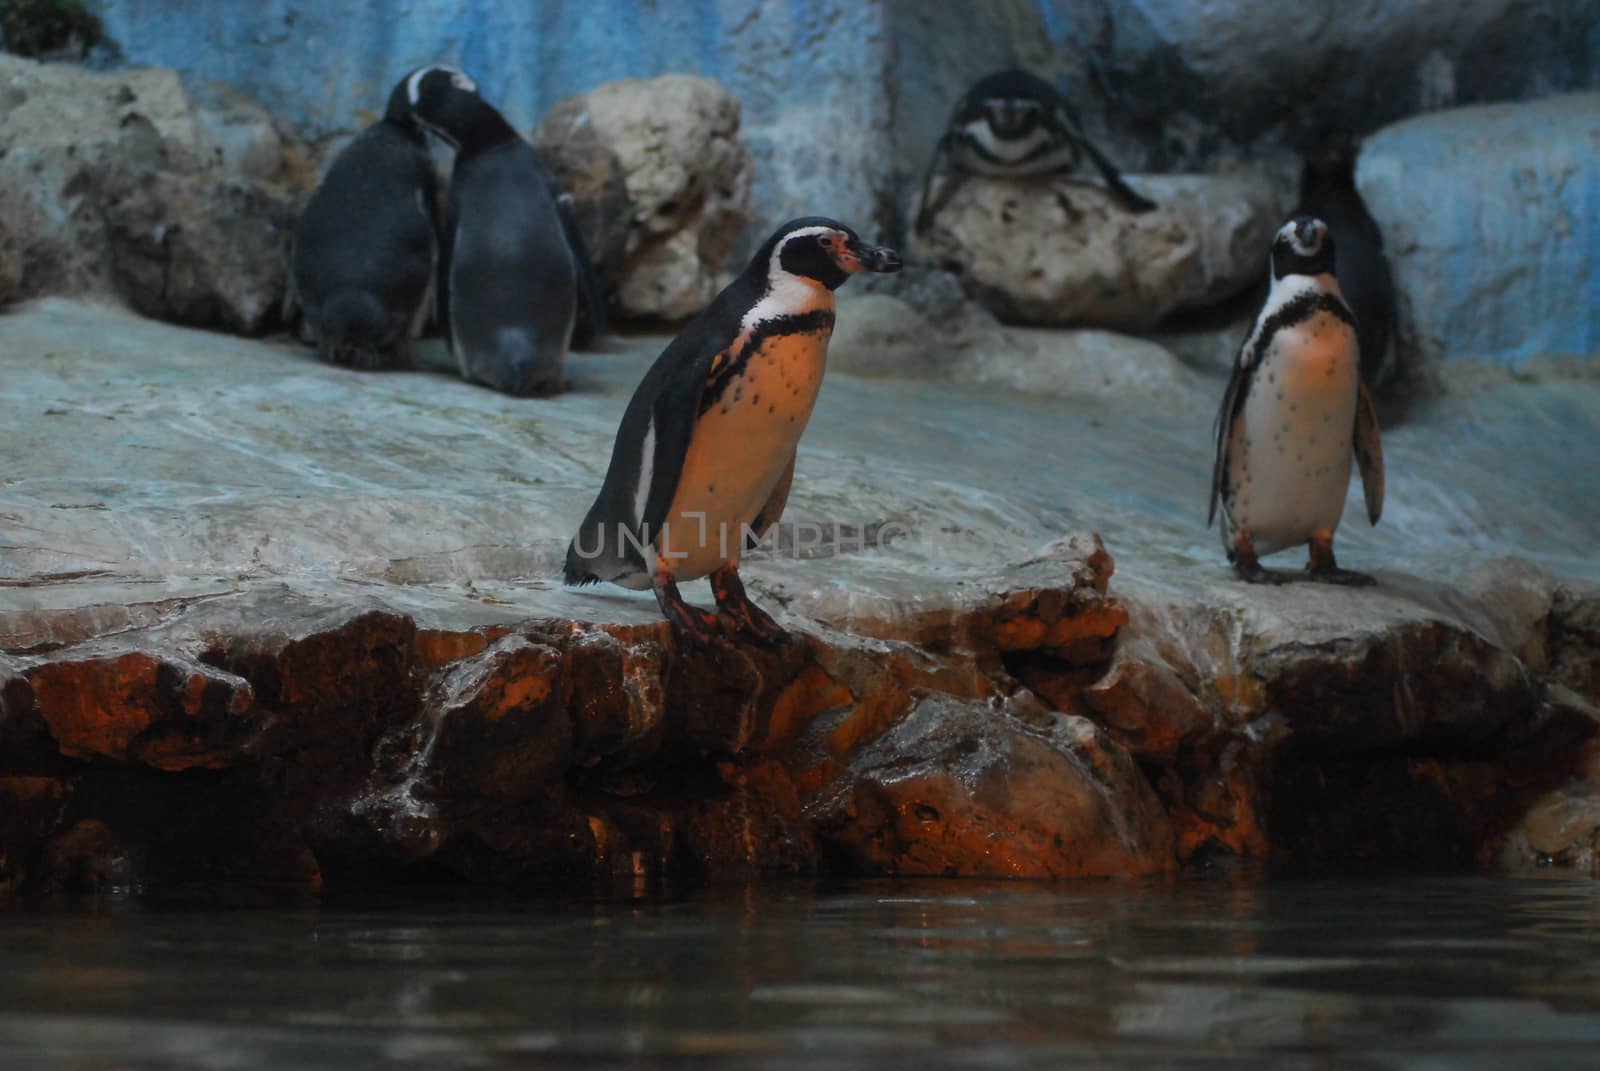 Penguins On Rocks In Zoo by think4photop